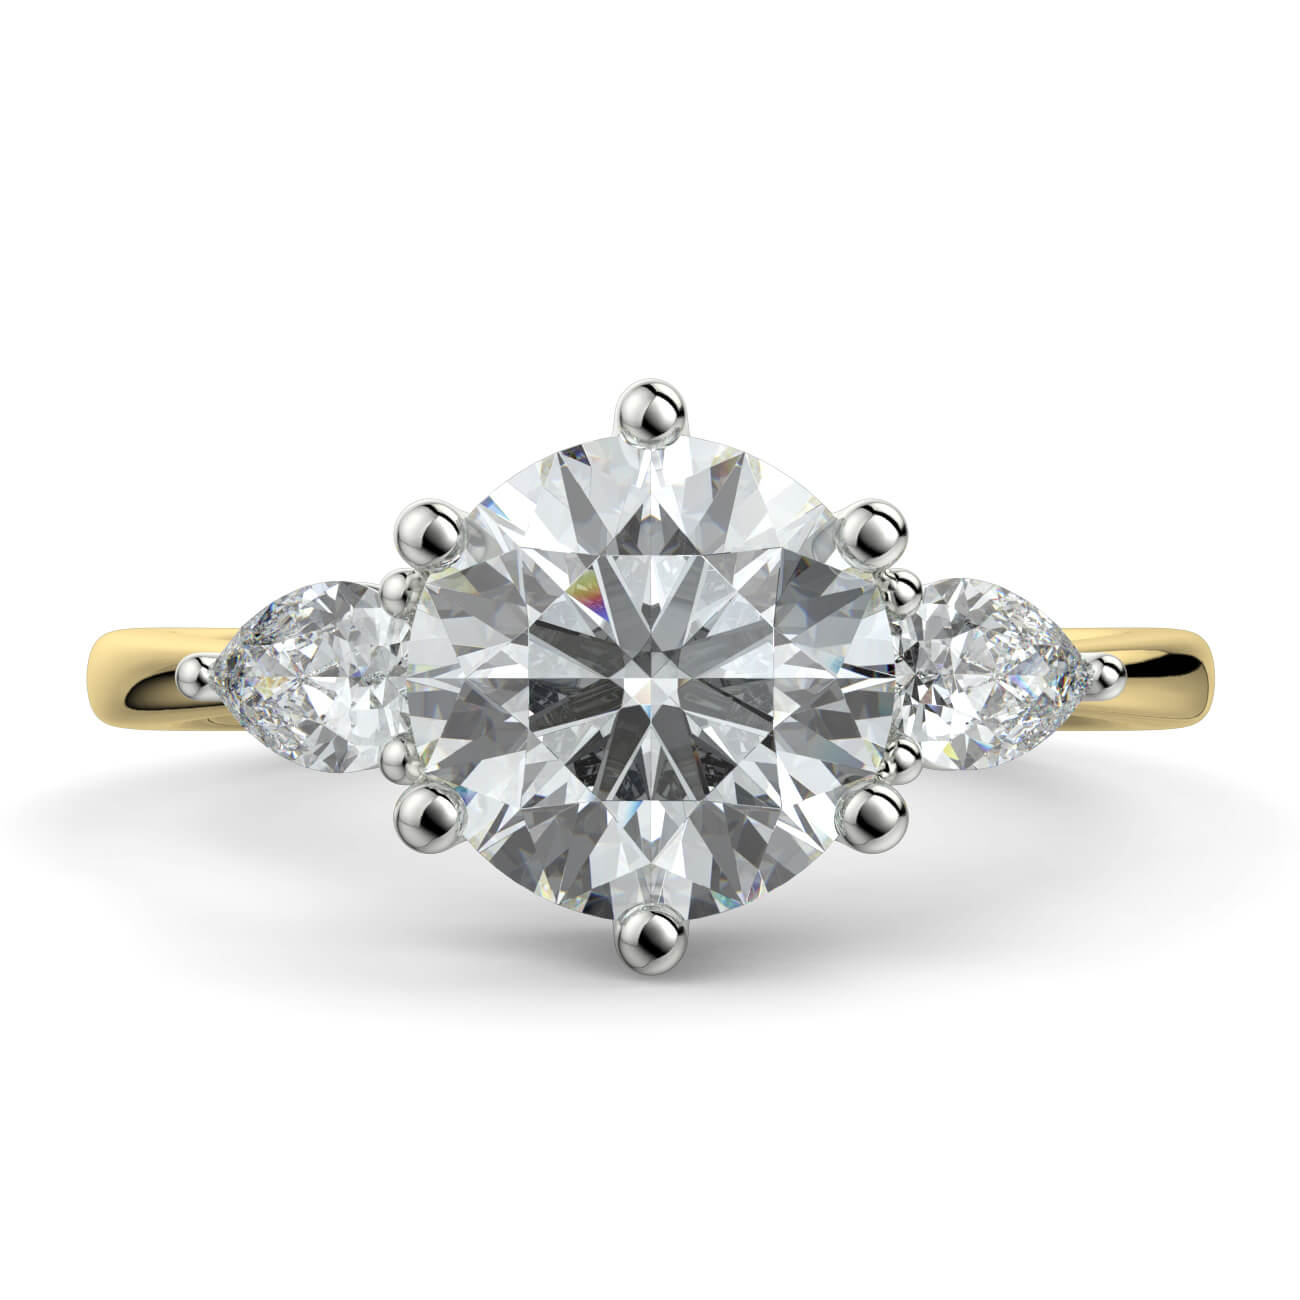 Round Brilliant Cut Diamond Ring With Pear Shape Side Diamonds In Yellow and White Gold – Australian Diamond Network